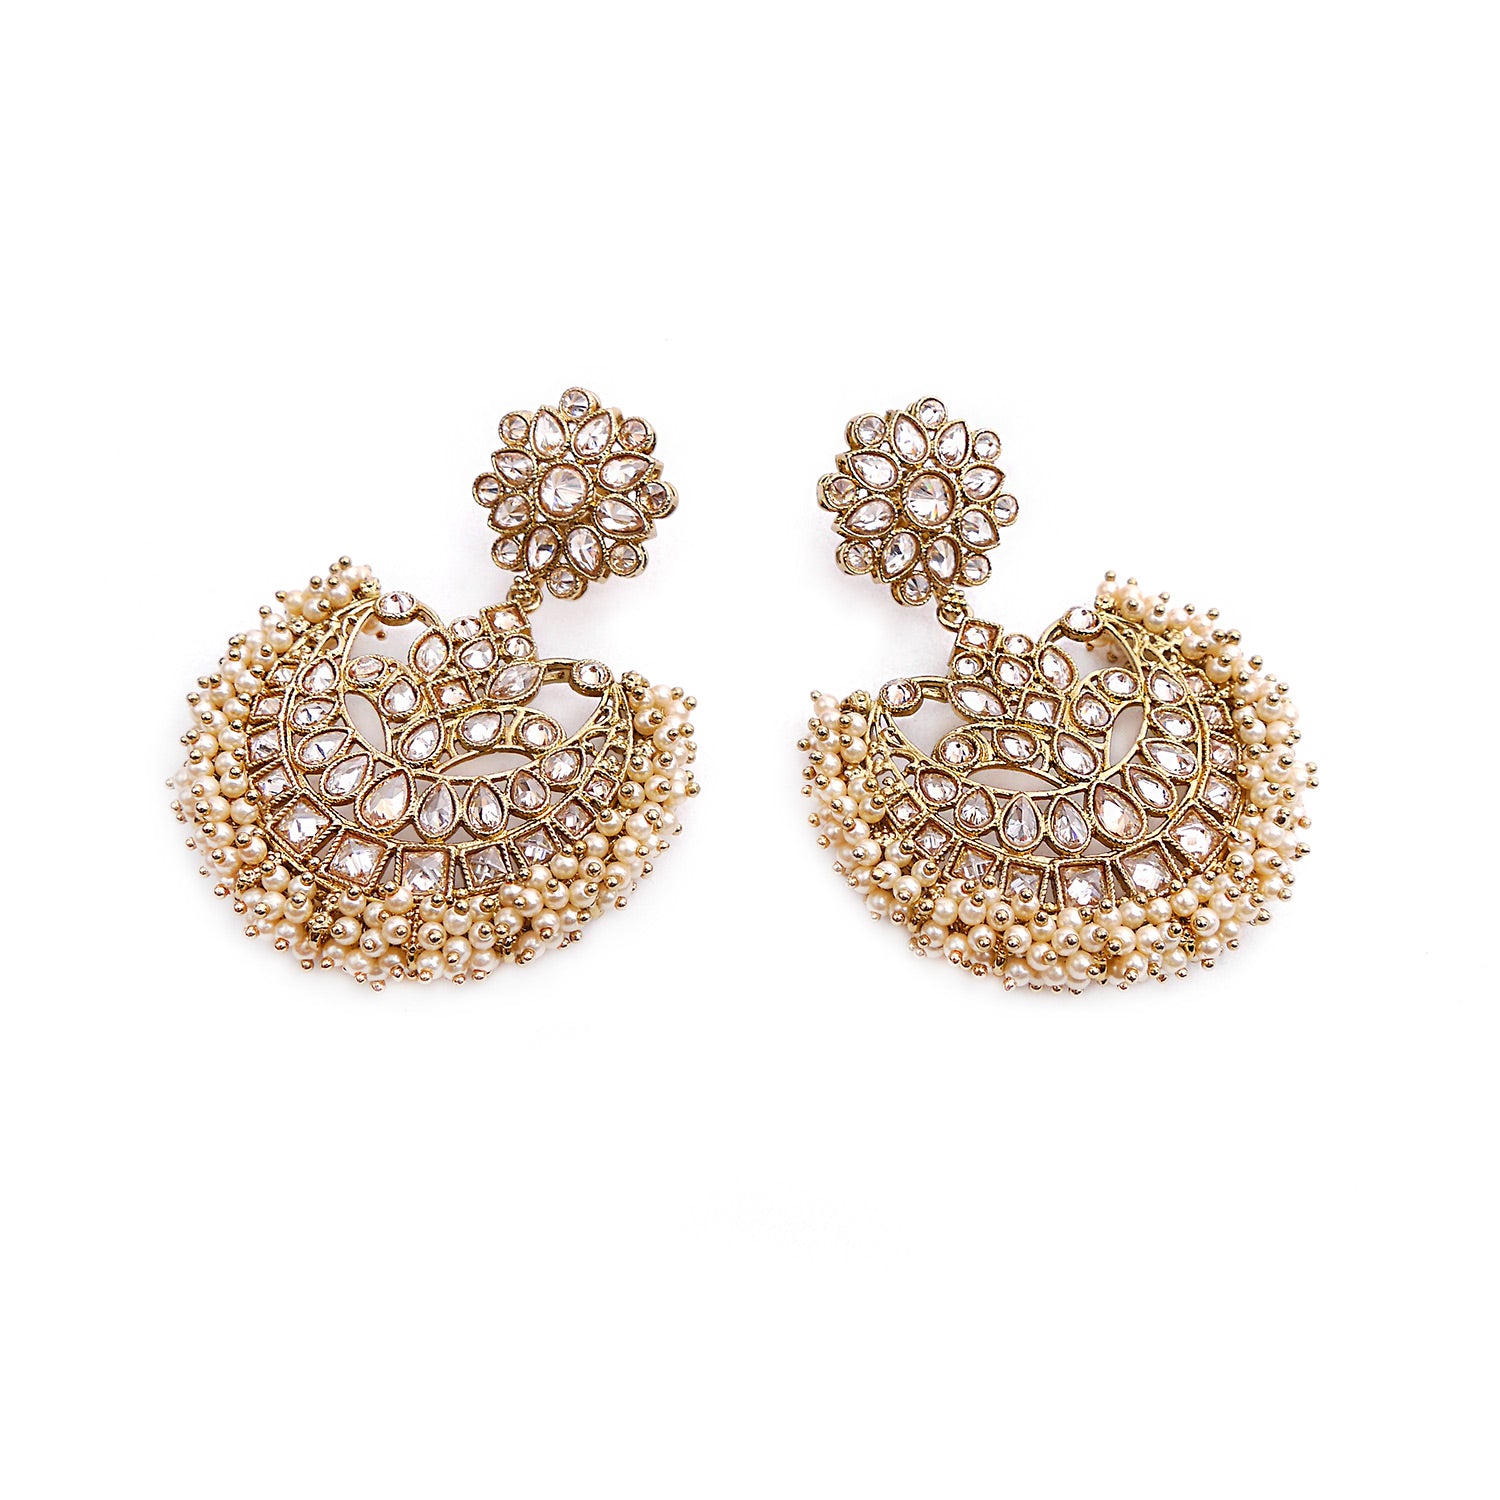 Round Drop Earrings with Pearls